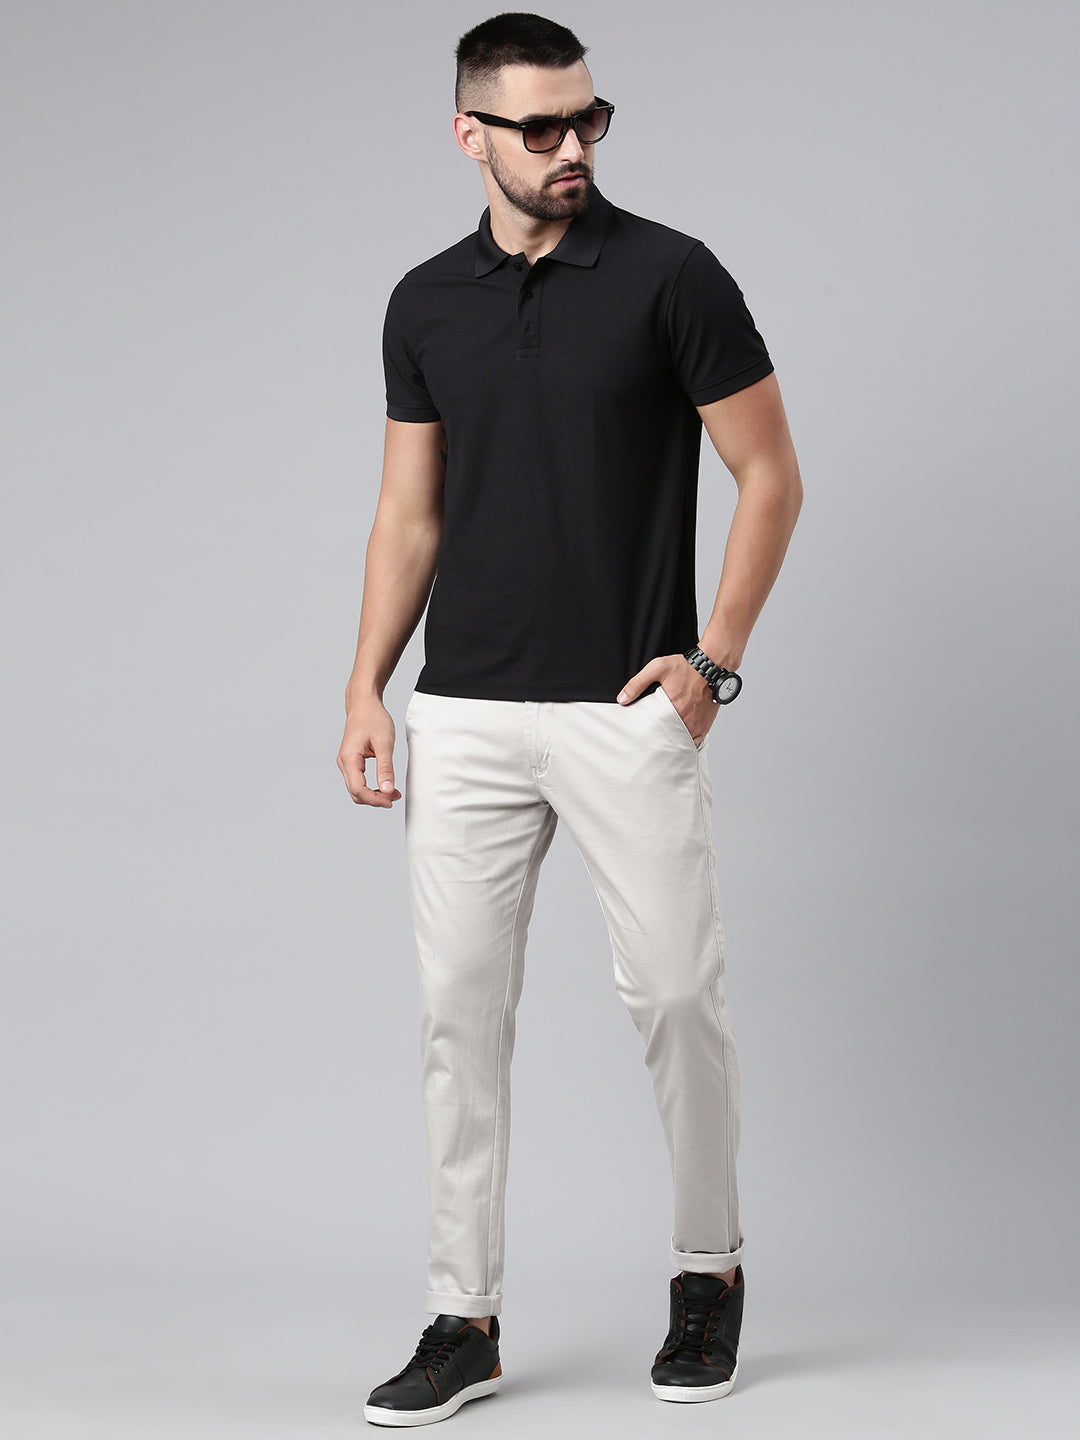 Classic Men's Trousers for Effortless Style - Light Grey